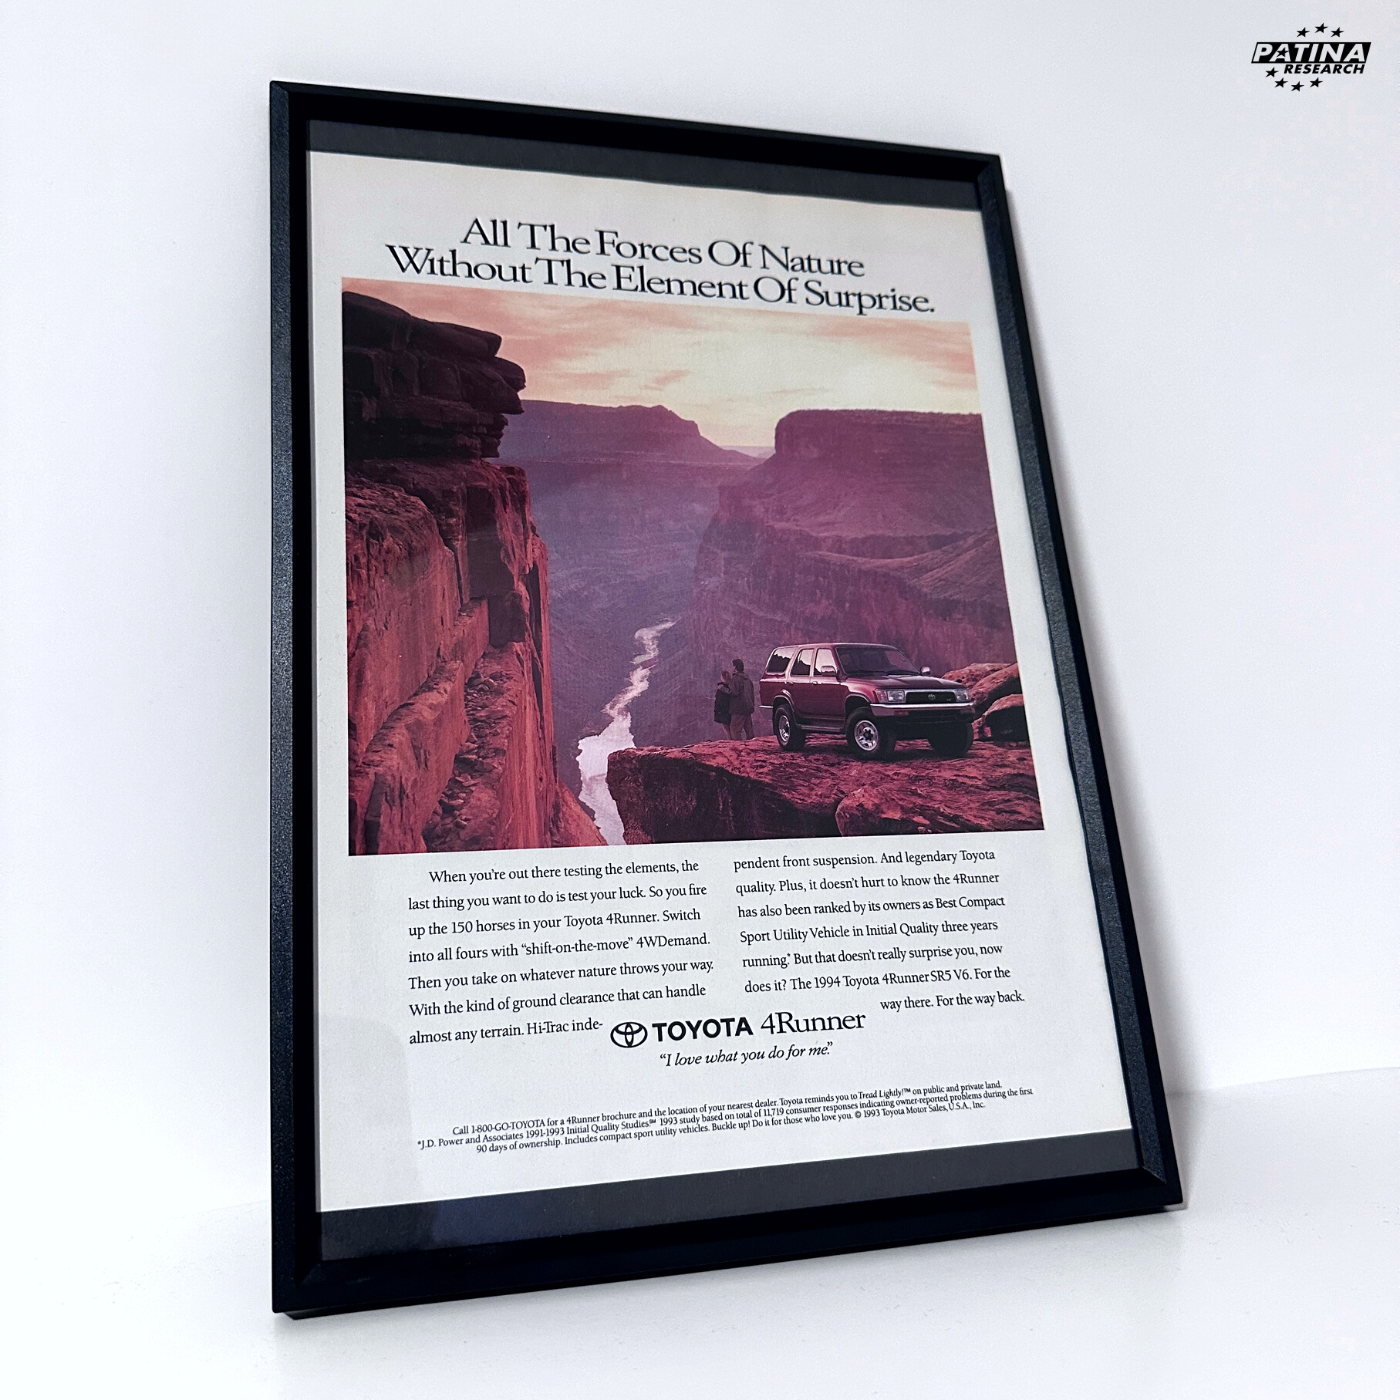 Toyota 4Runner all the forces framed ad